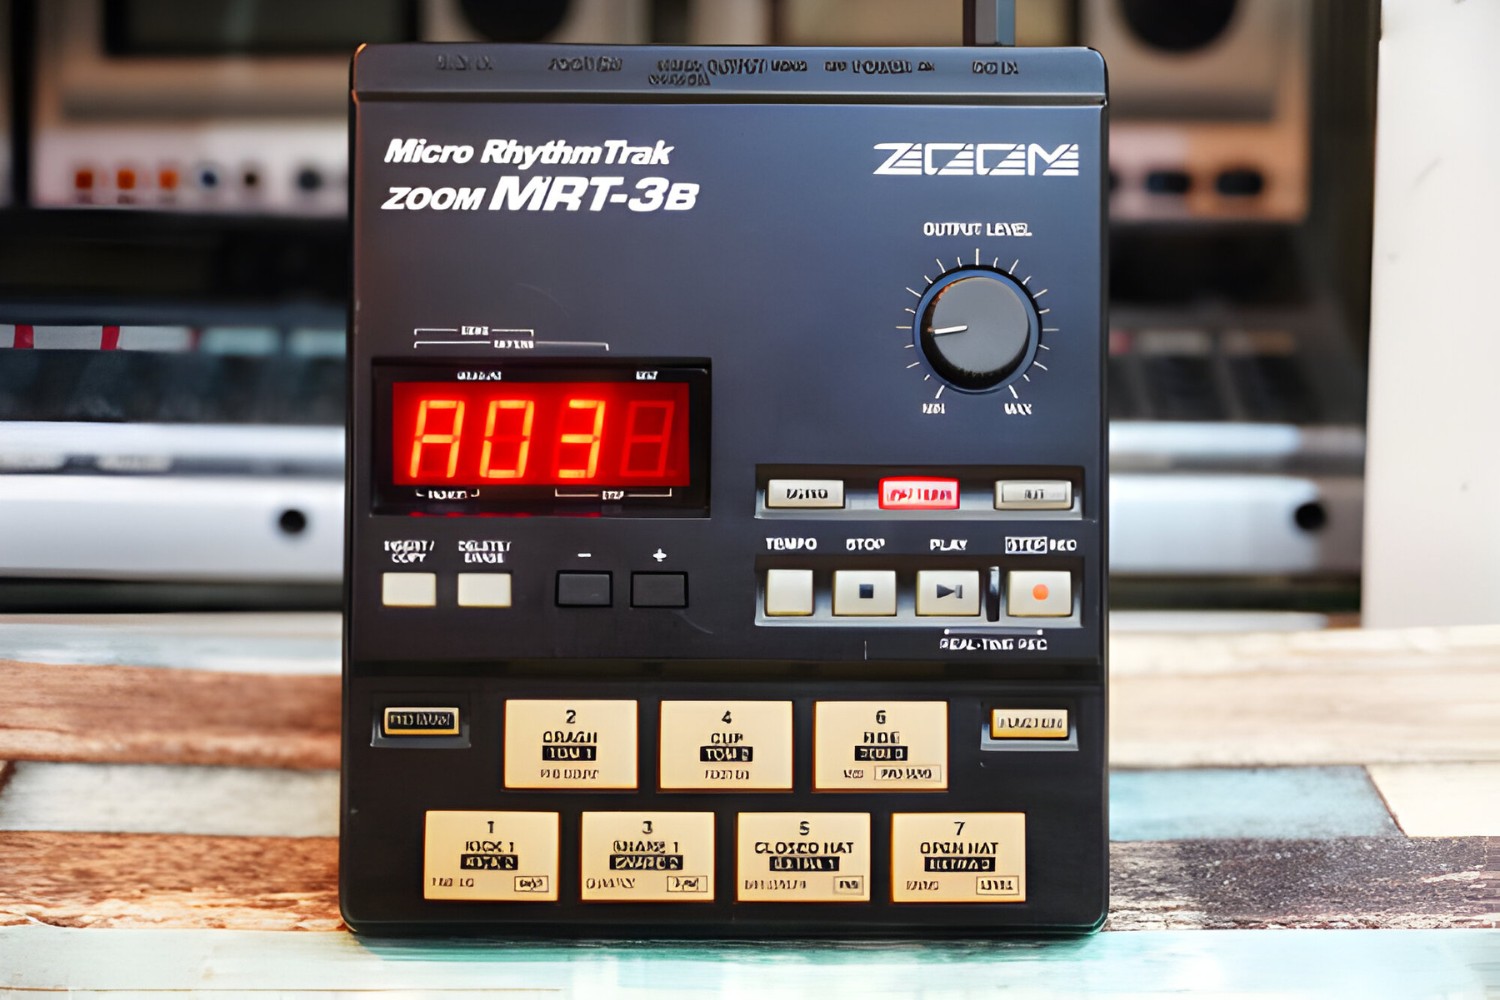 In What Year Was The Zoom Drum Machine MRT-3B Introduced?